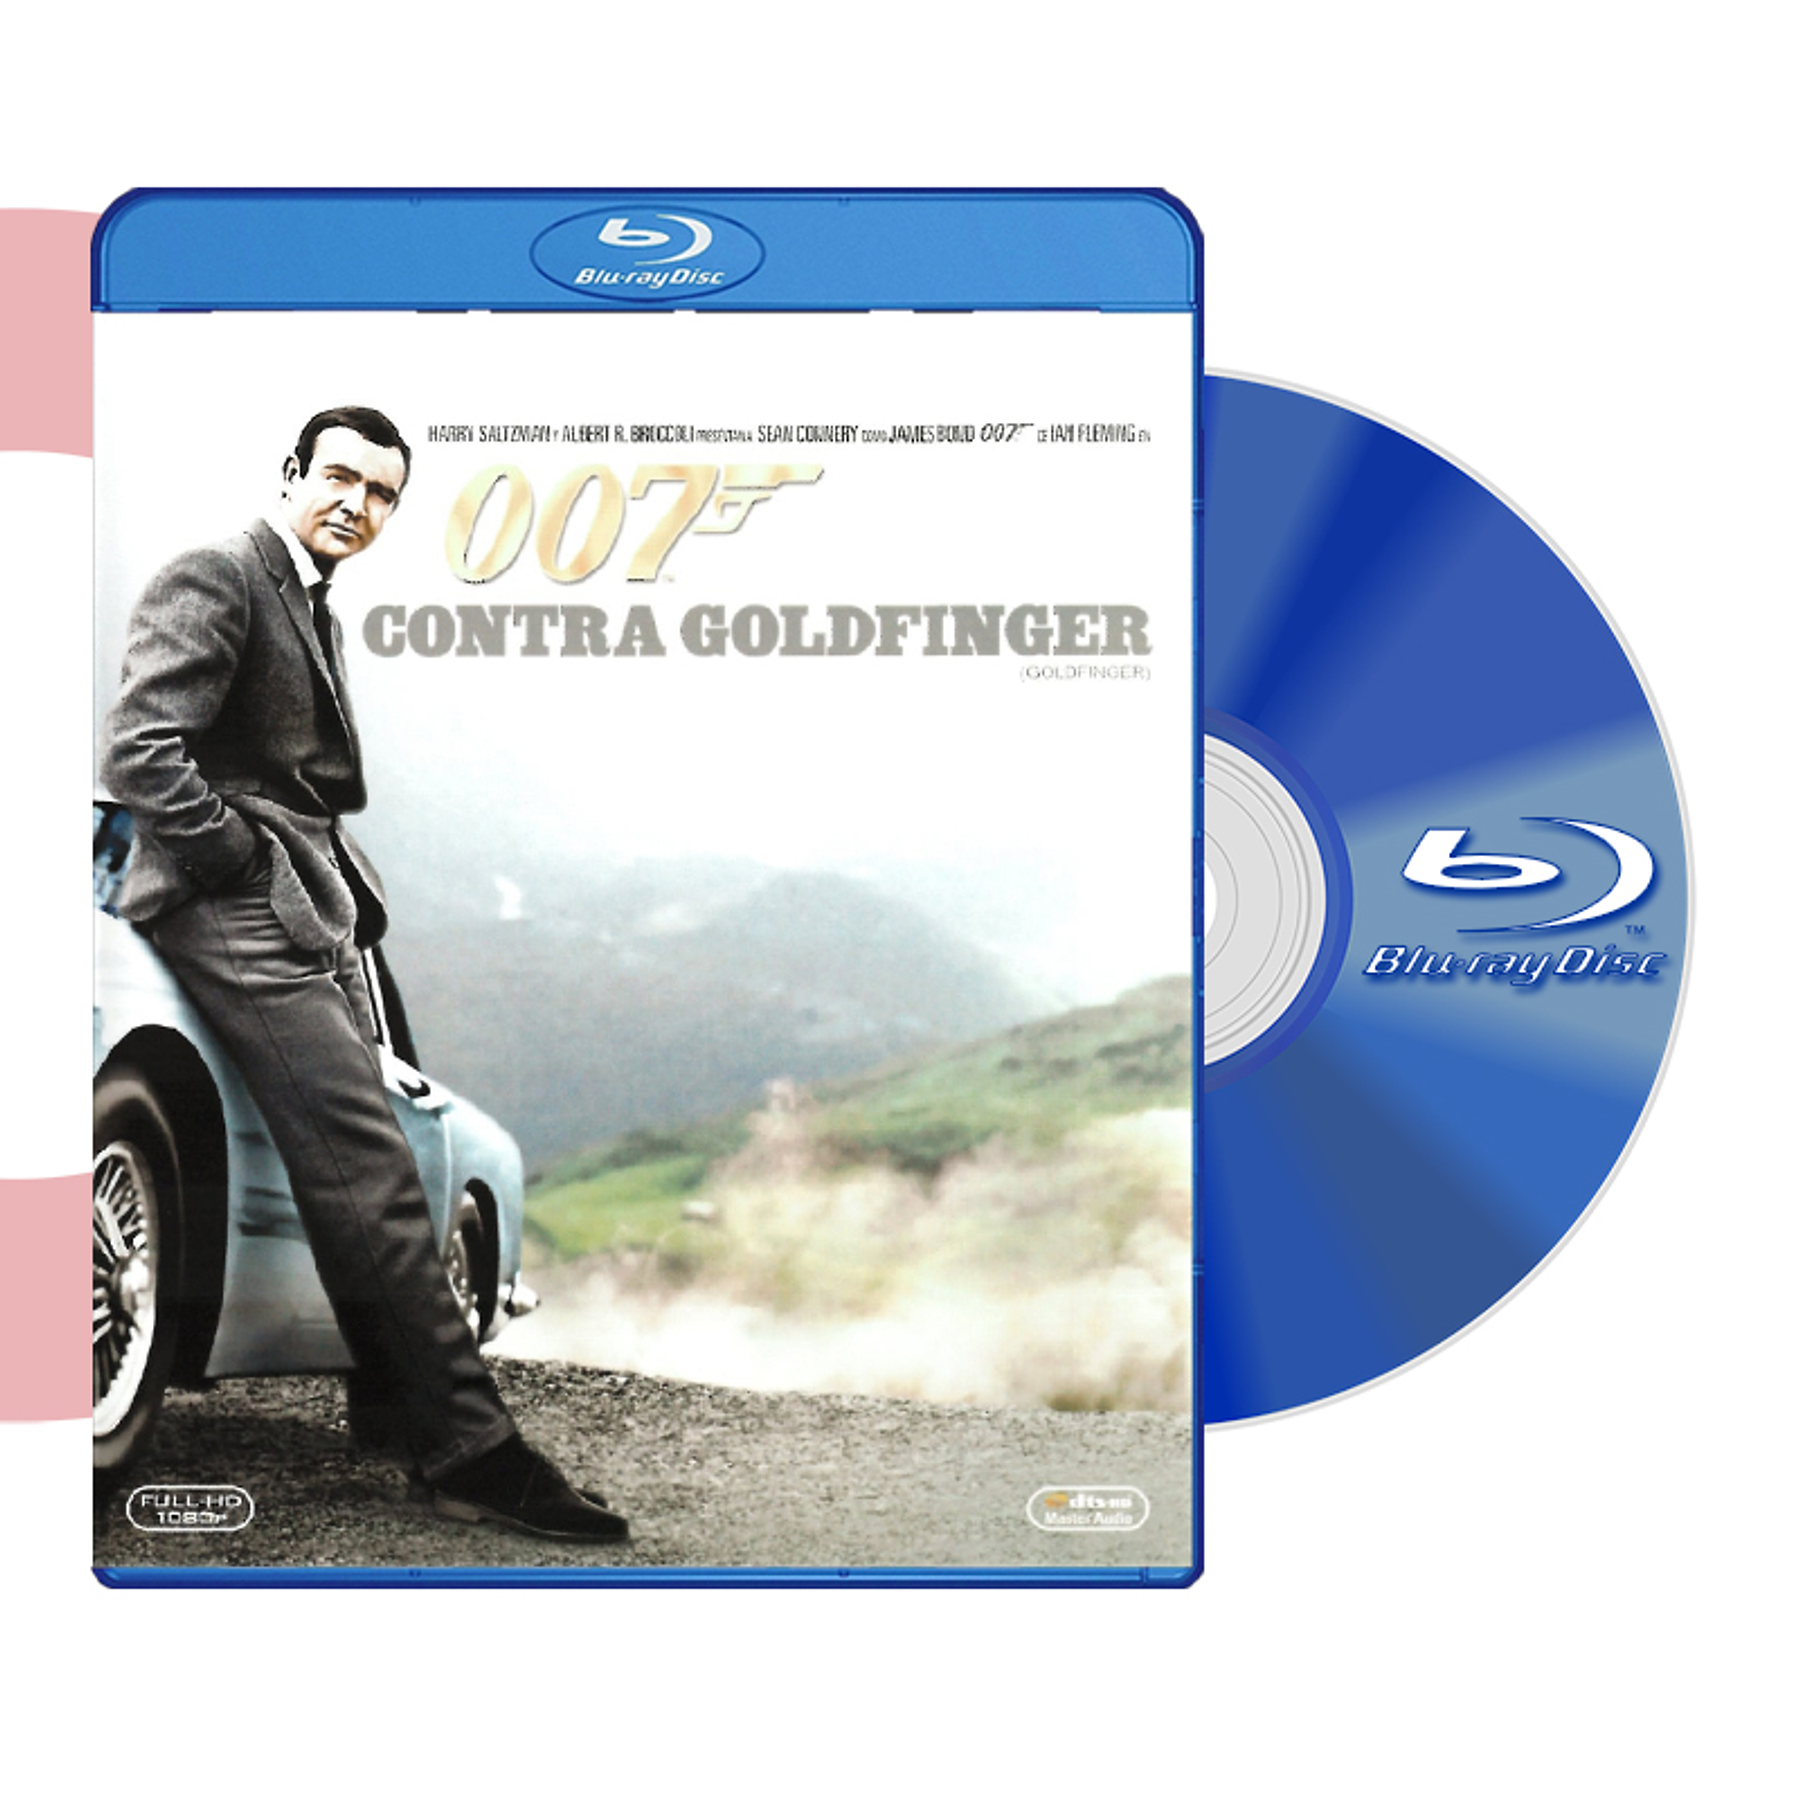 BLU RAY 007 CONTRA GOLDFINGER